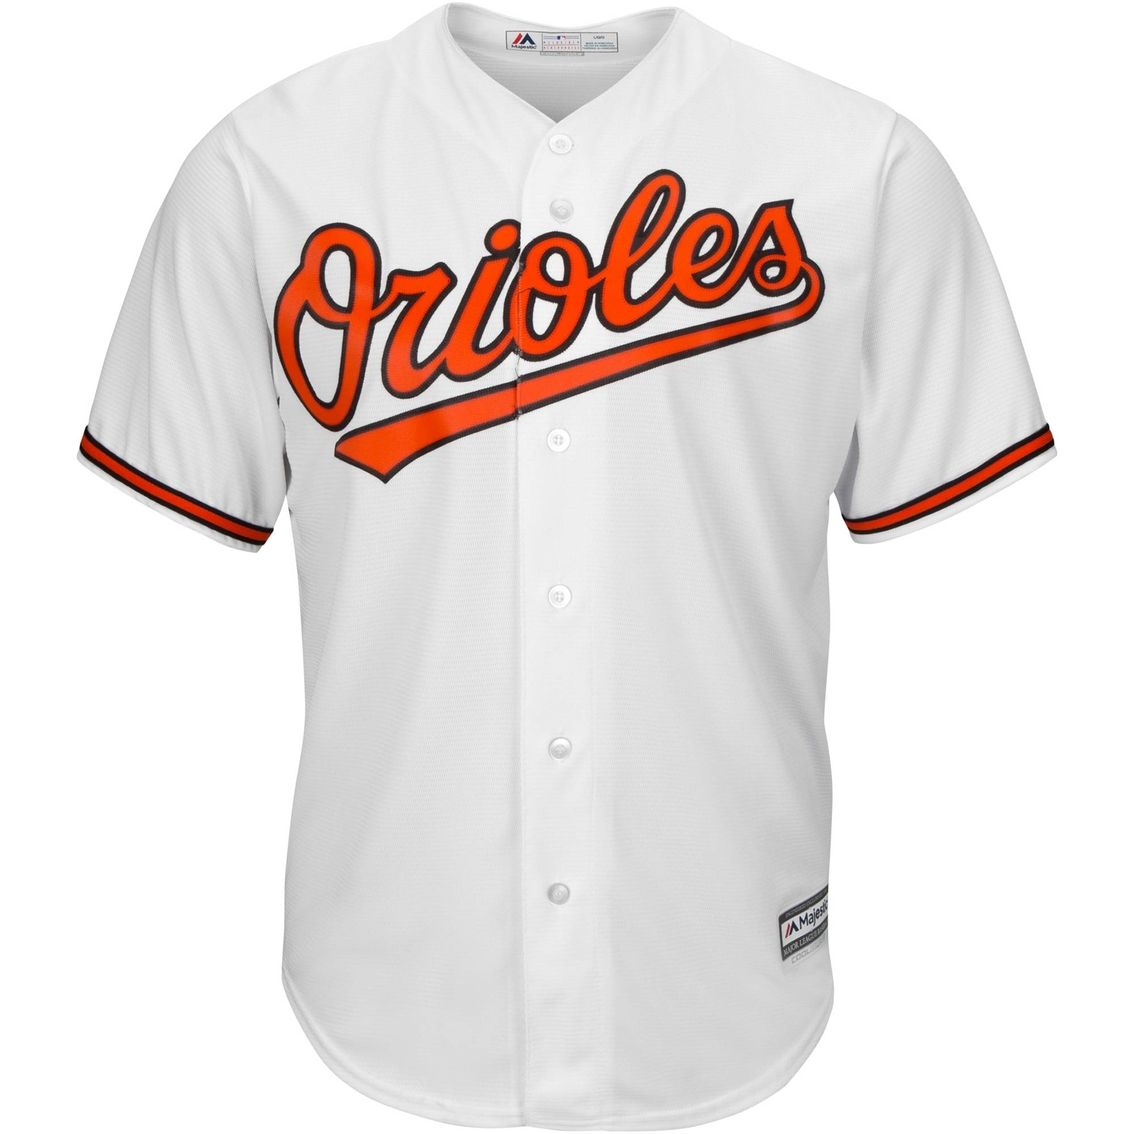 Majestic International Mlb Baltimore Orioles Men's Home Replica Jersey, Shirts, Clothing & Accessories